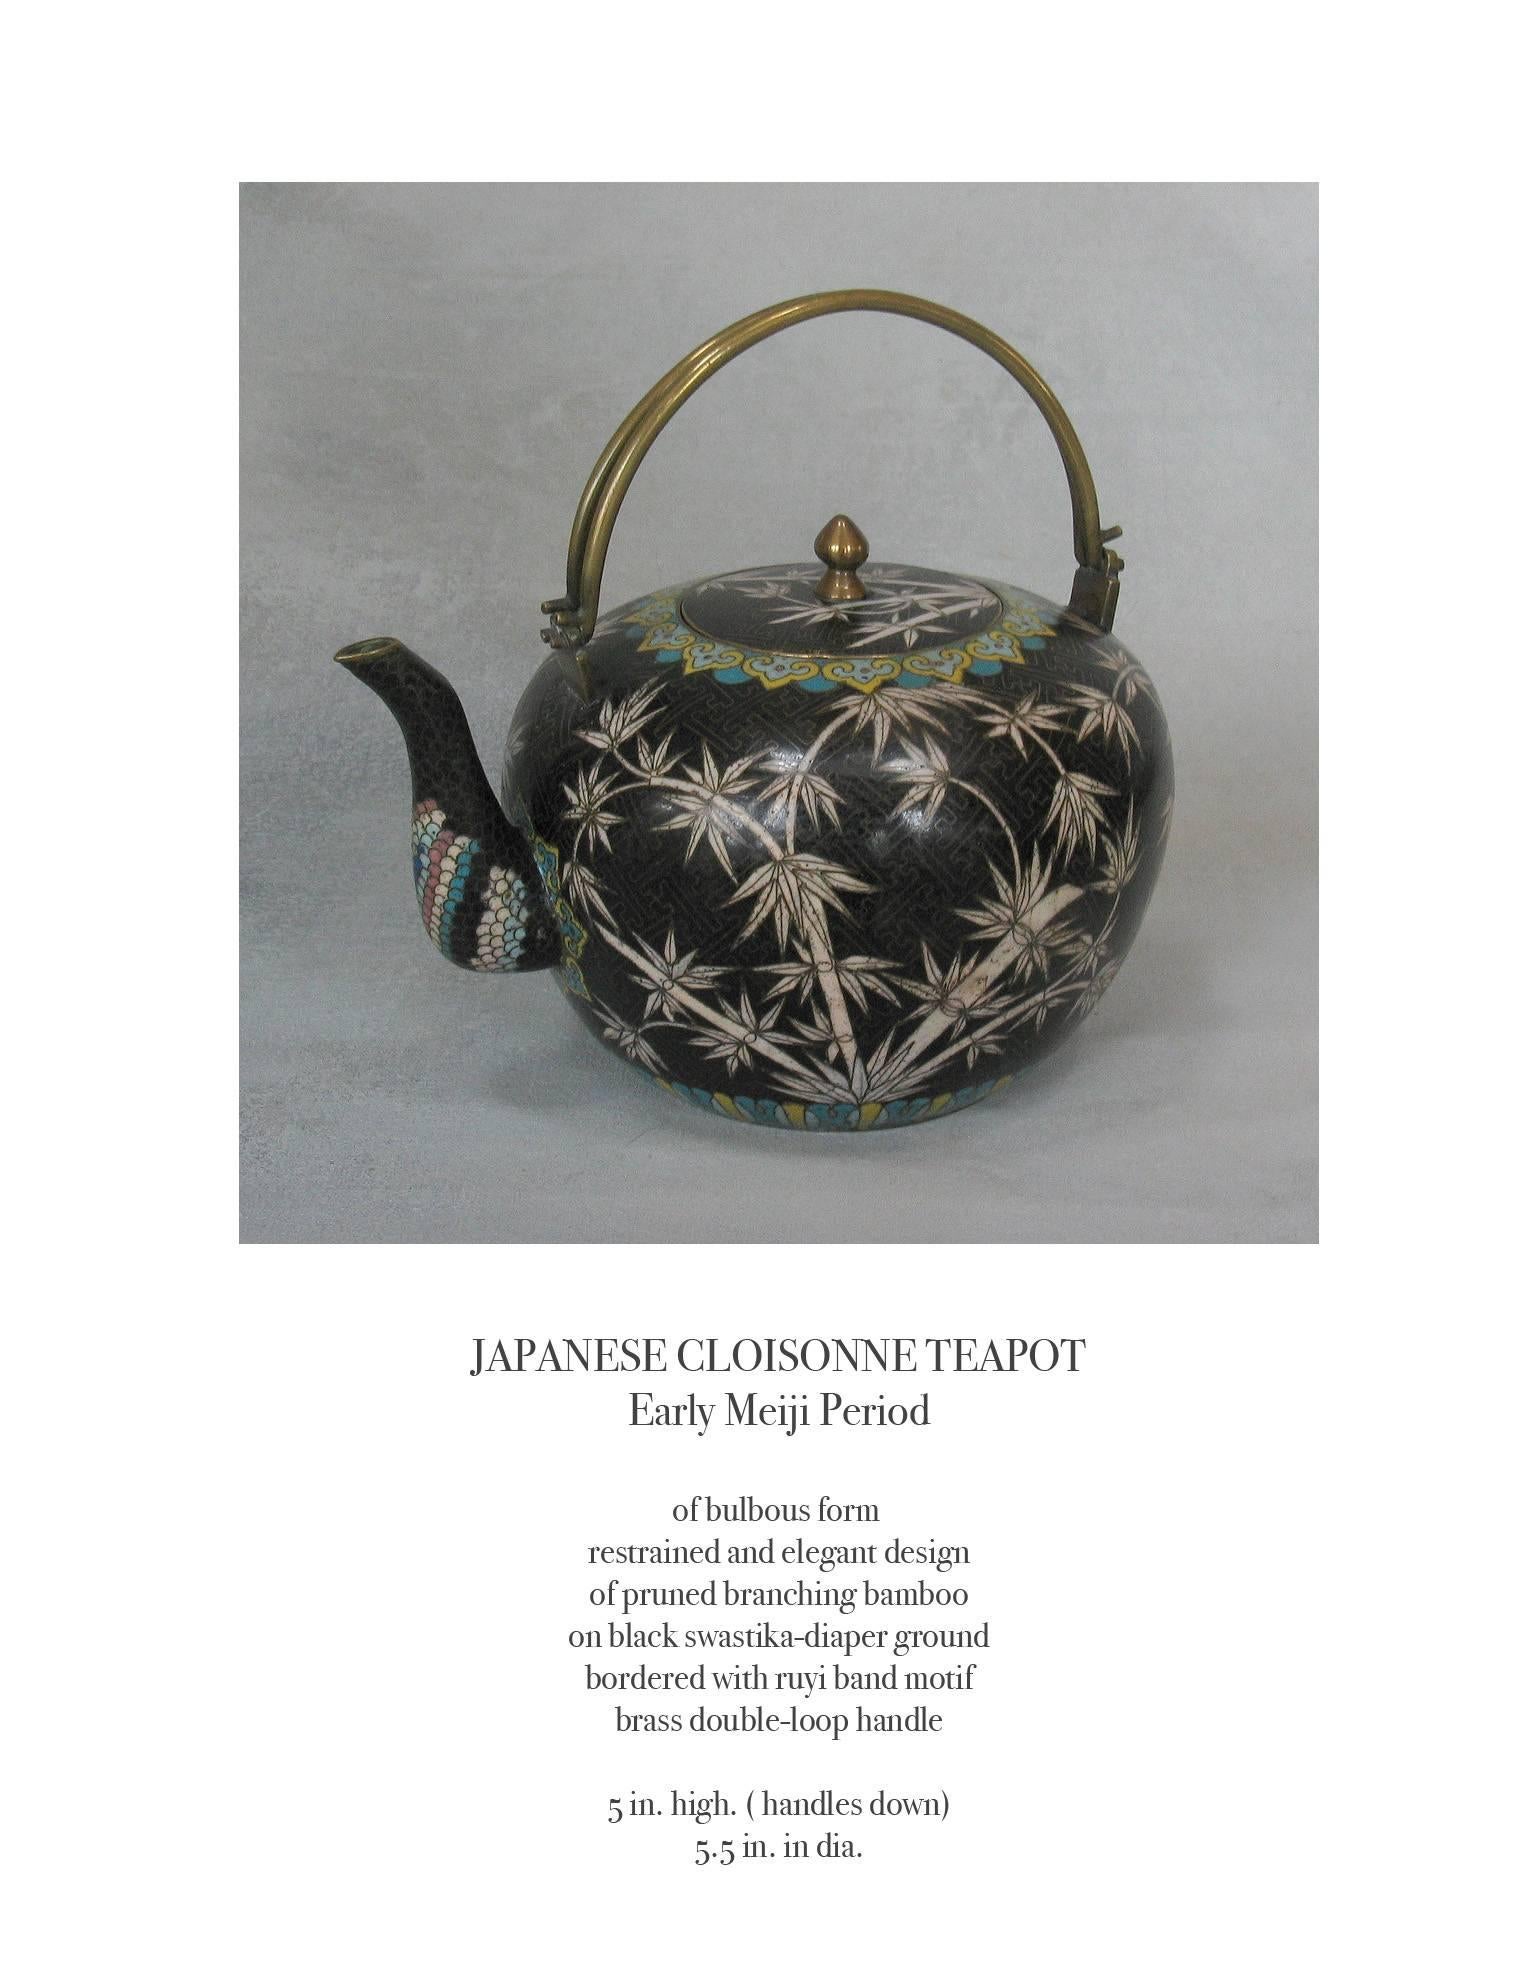 Japanese cloisonne teapot, early Meiji period, of a bulbous form, restrained and elegant design of pruned branching bamboo on black swastika-diaper ground bordered with ruyi band motif brass double loop handle. The teapot measures 5